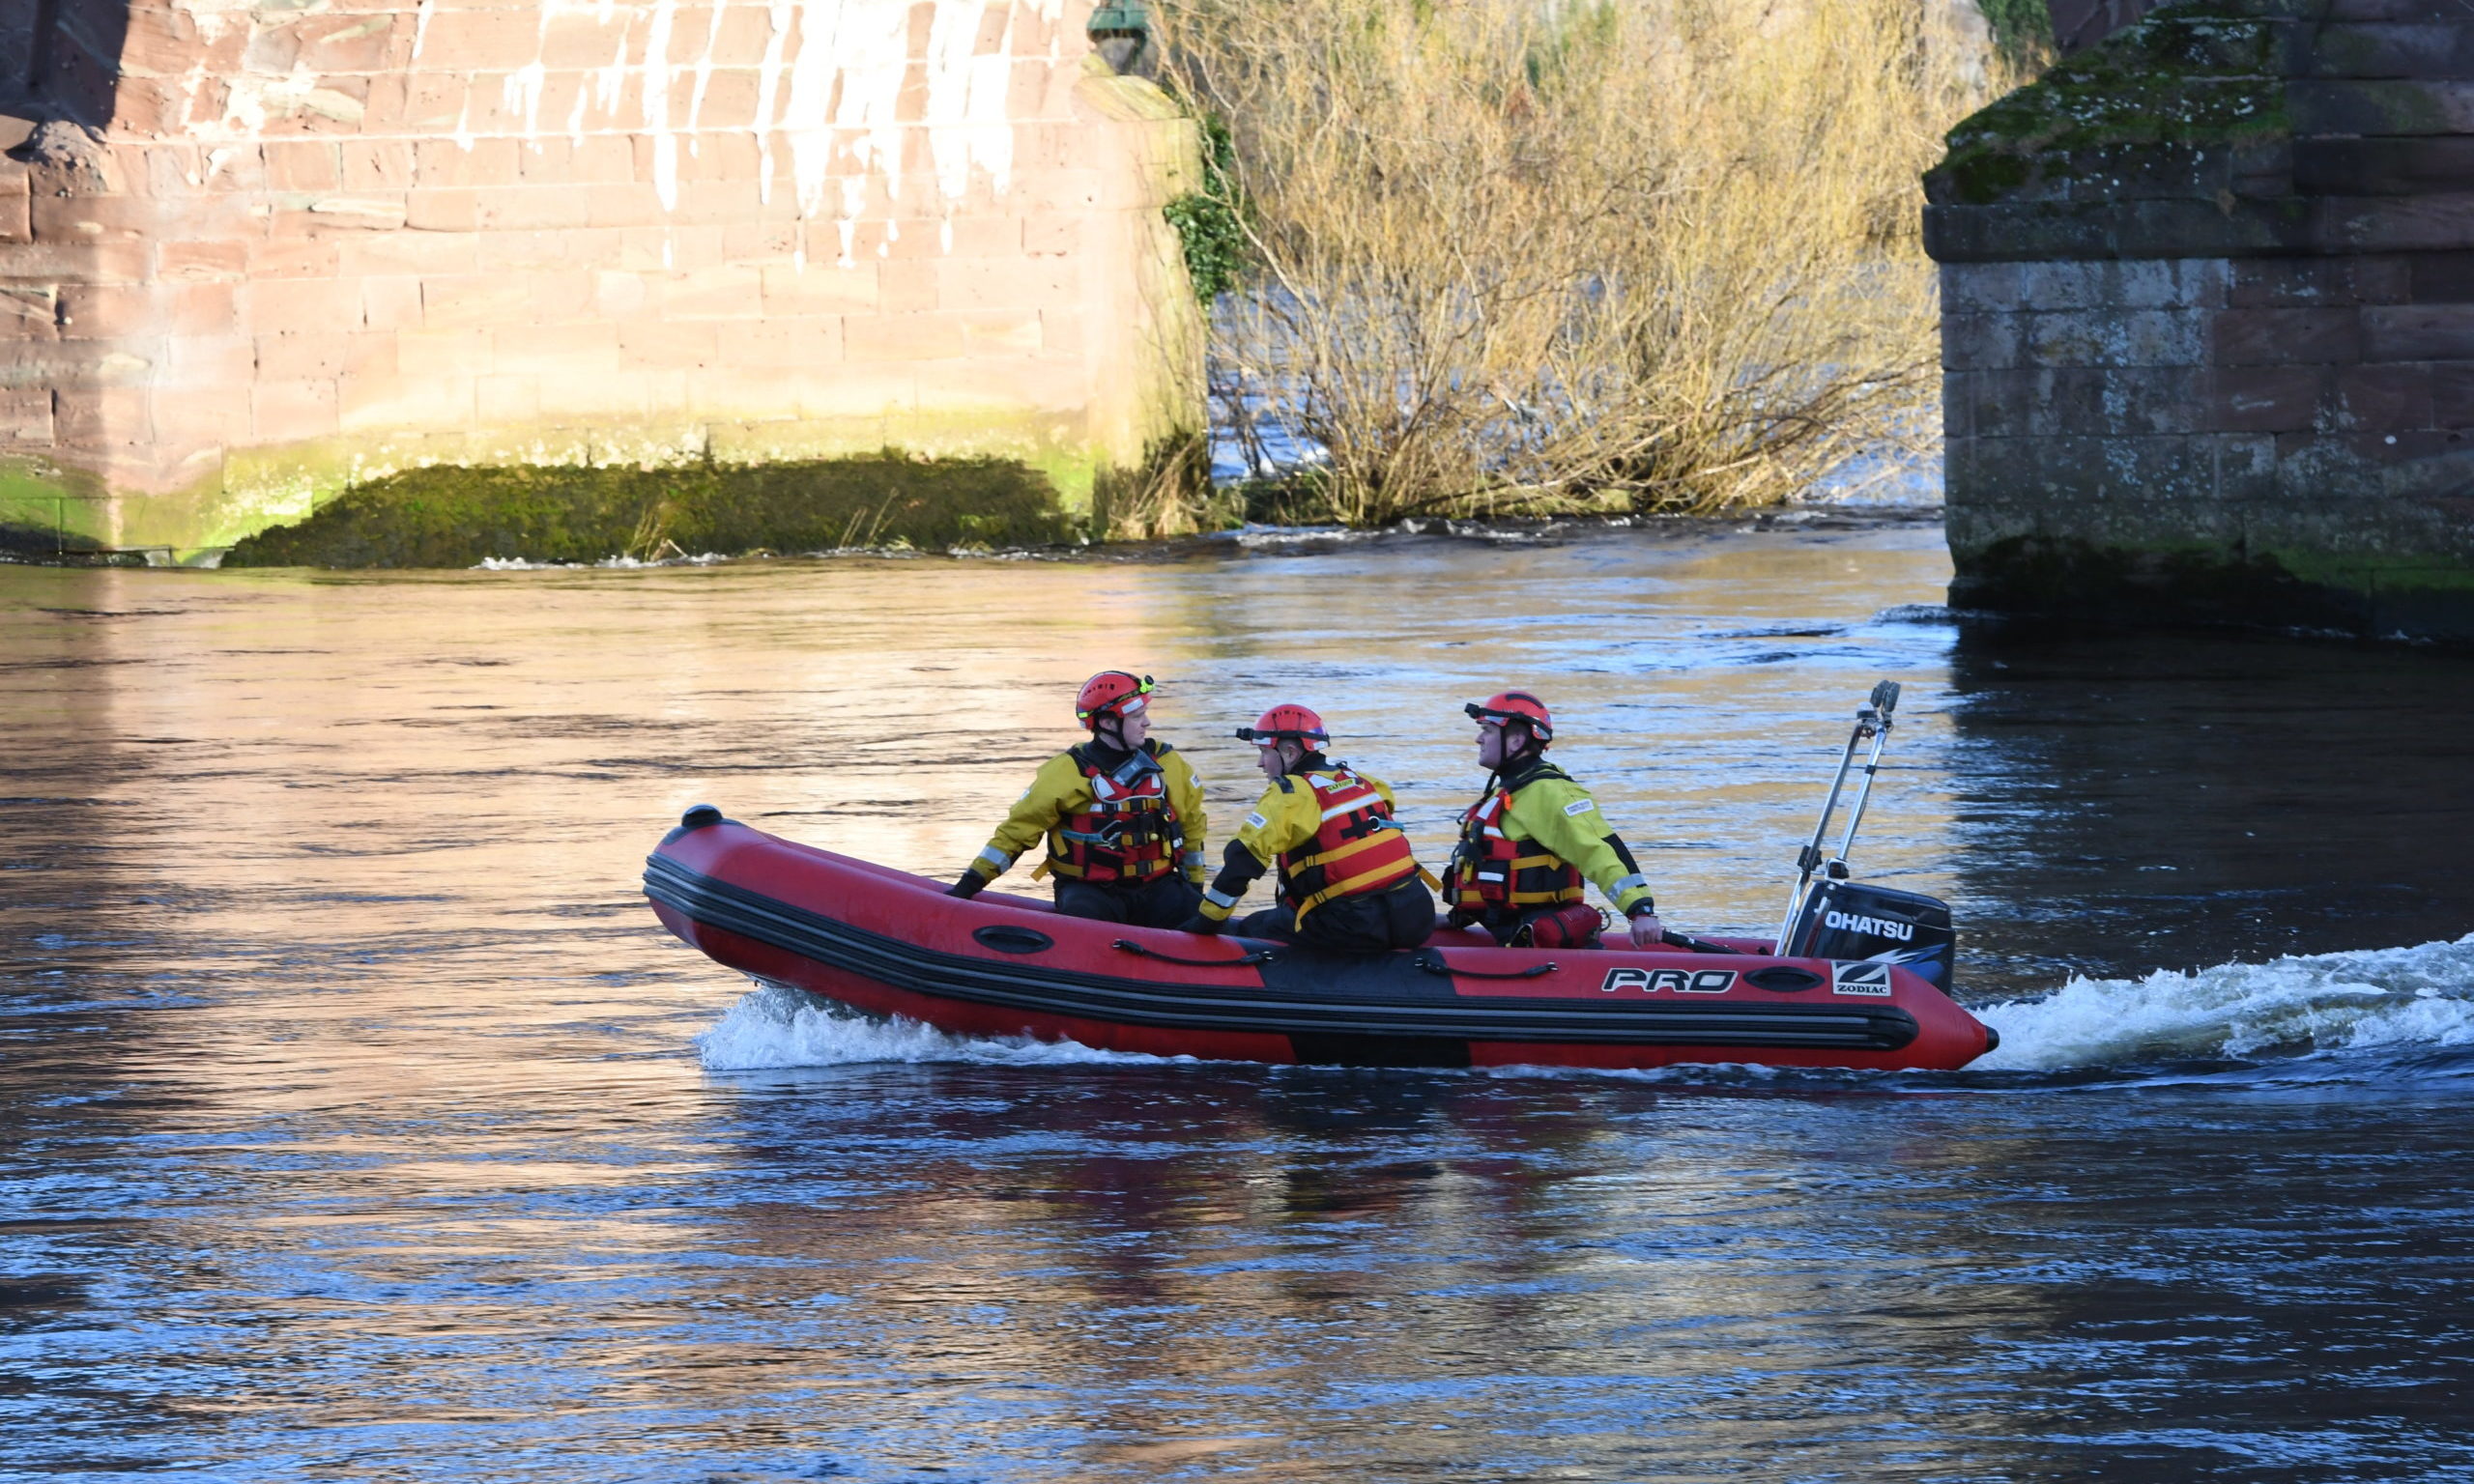 A search is under way along the River Tay in Perth.